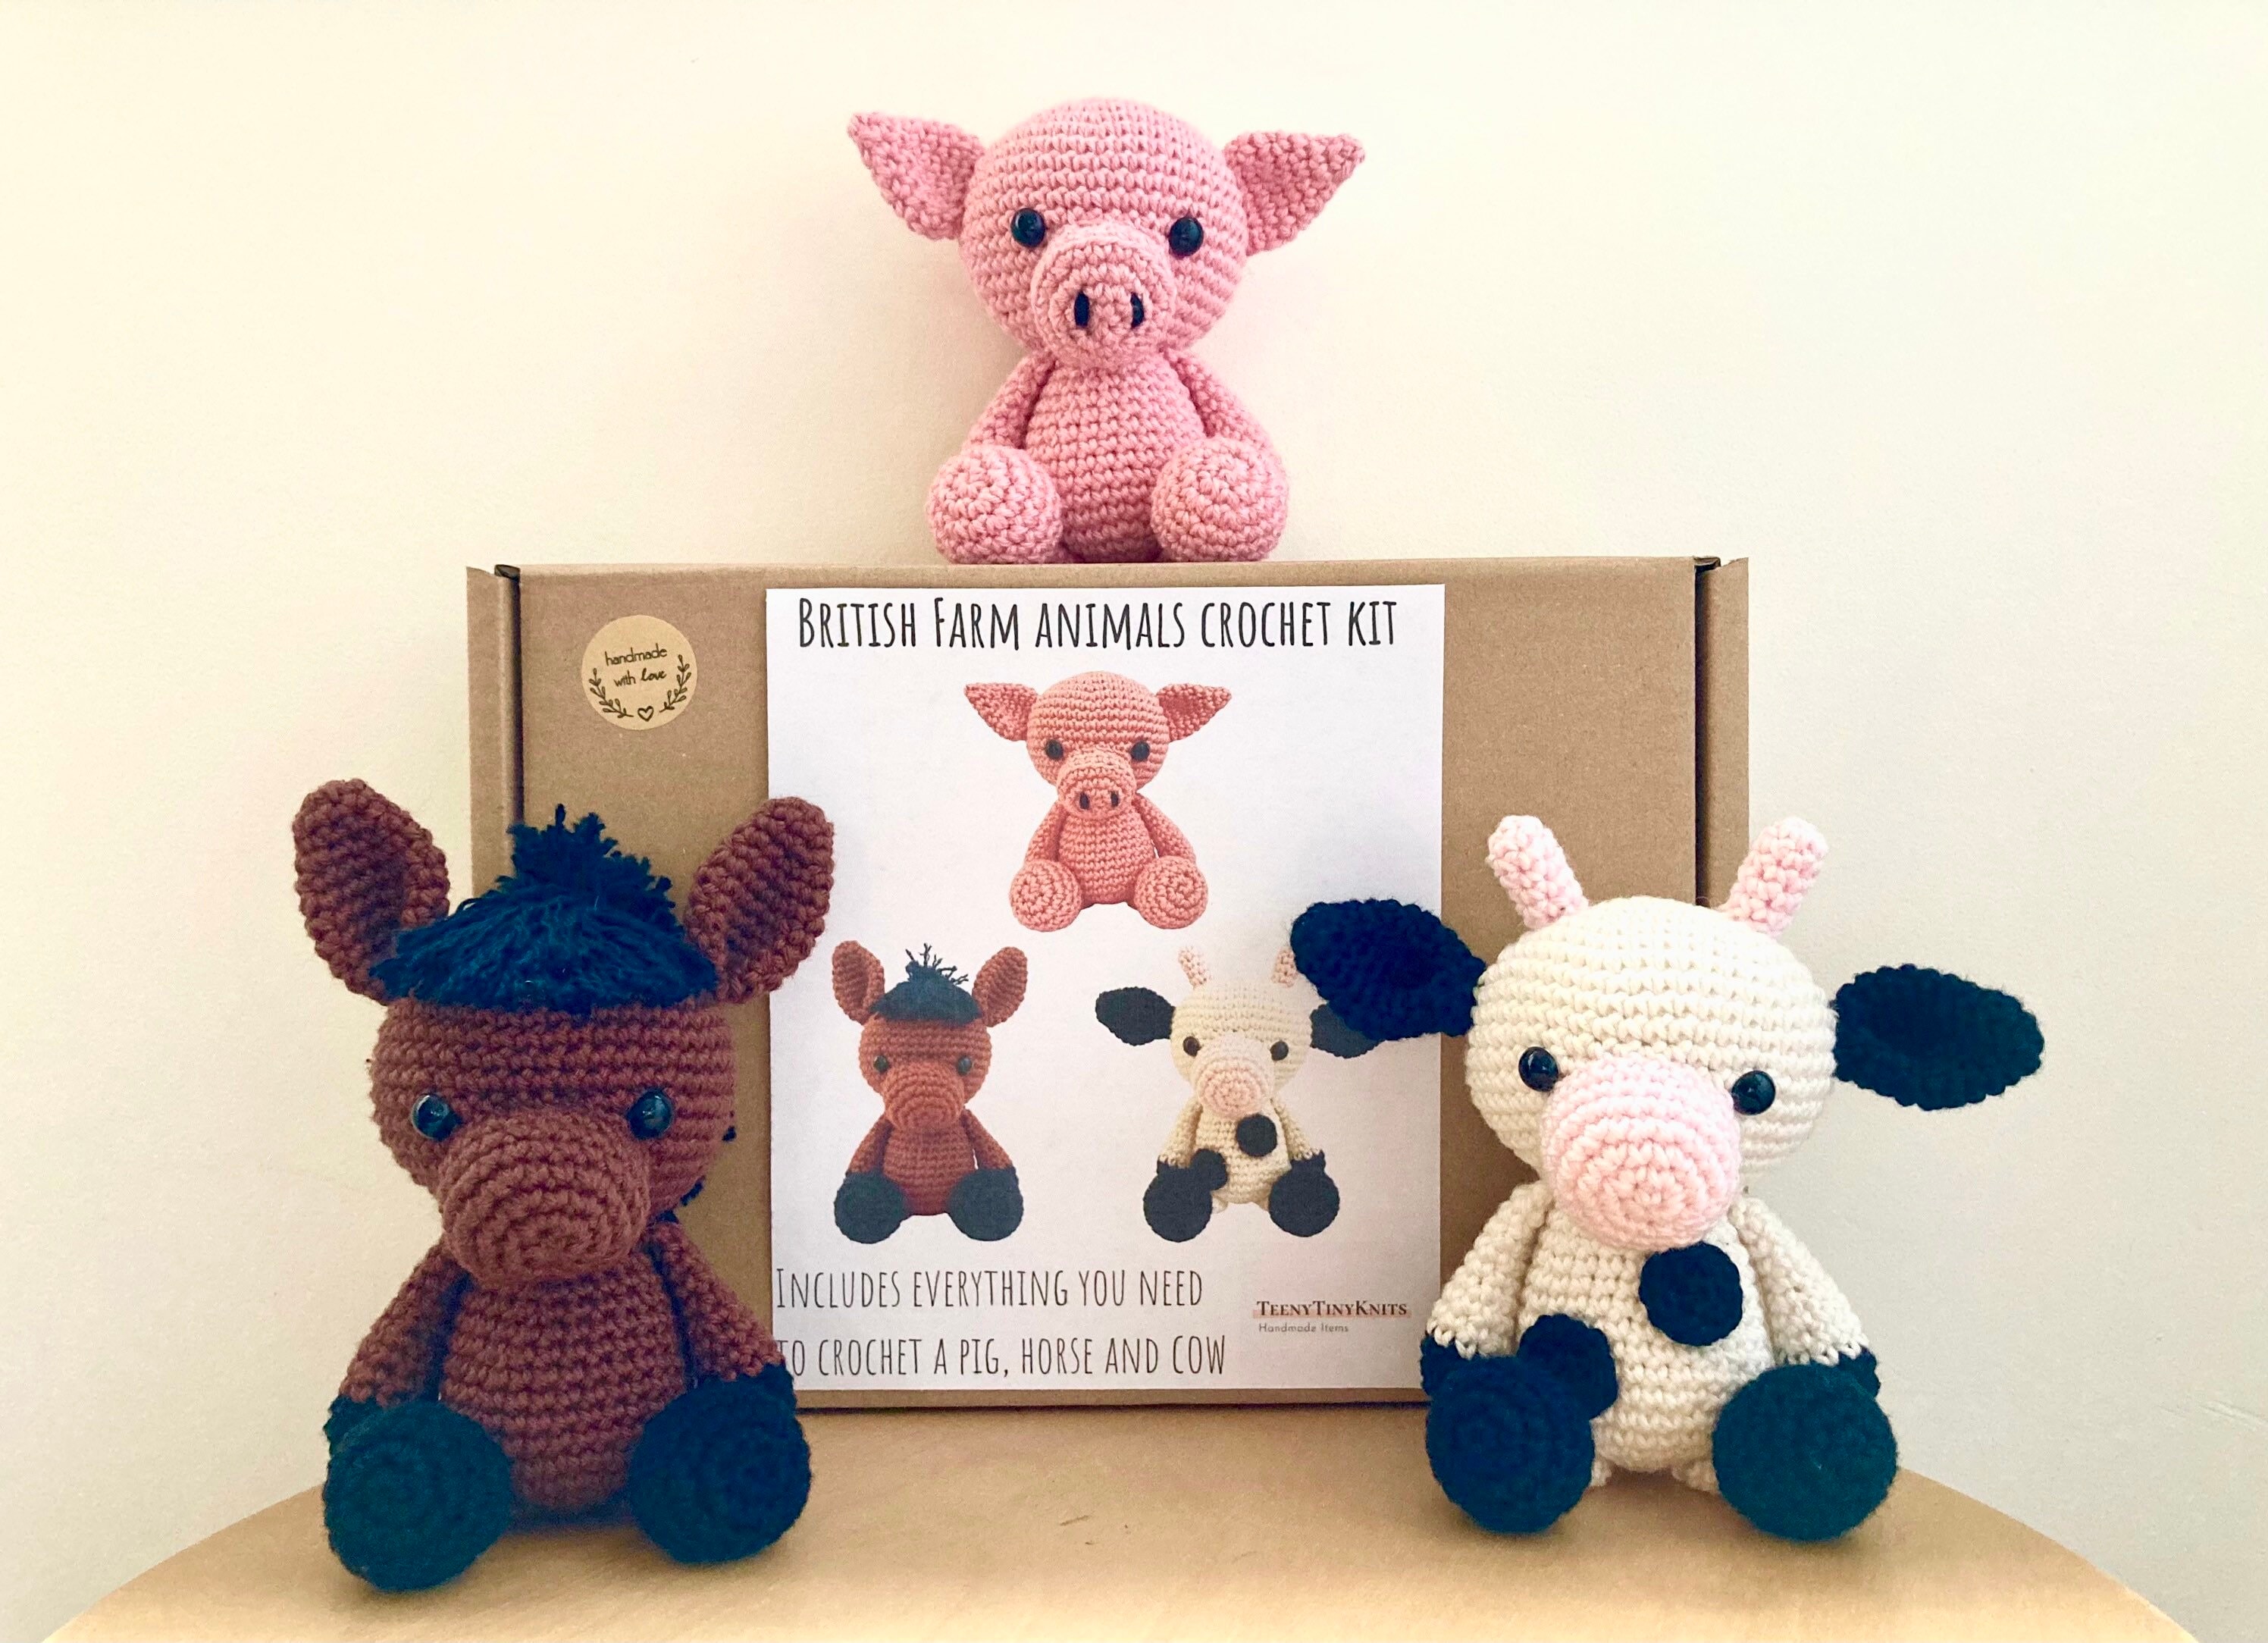 Crochet Kit for a Cute Amigurumi Animal Toy Hettie the Highland Cow DIY  Kit/crafting Kit/starter Pack 